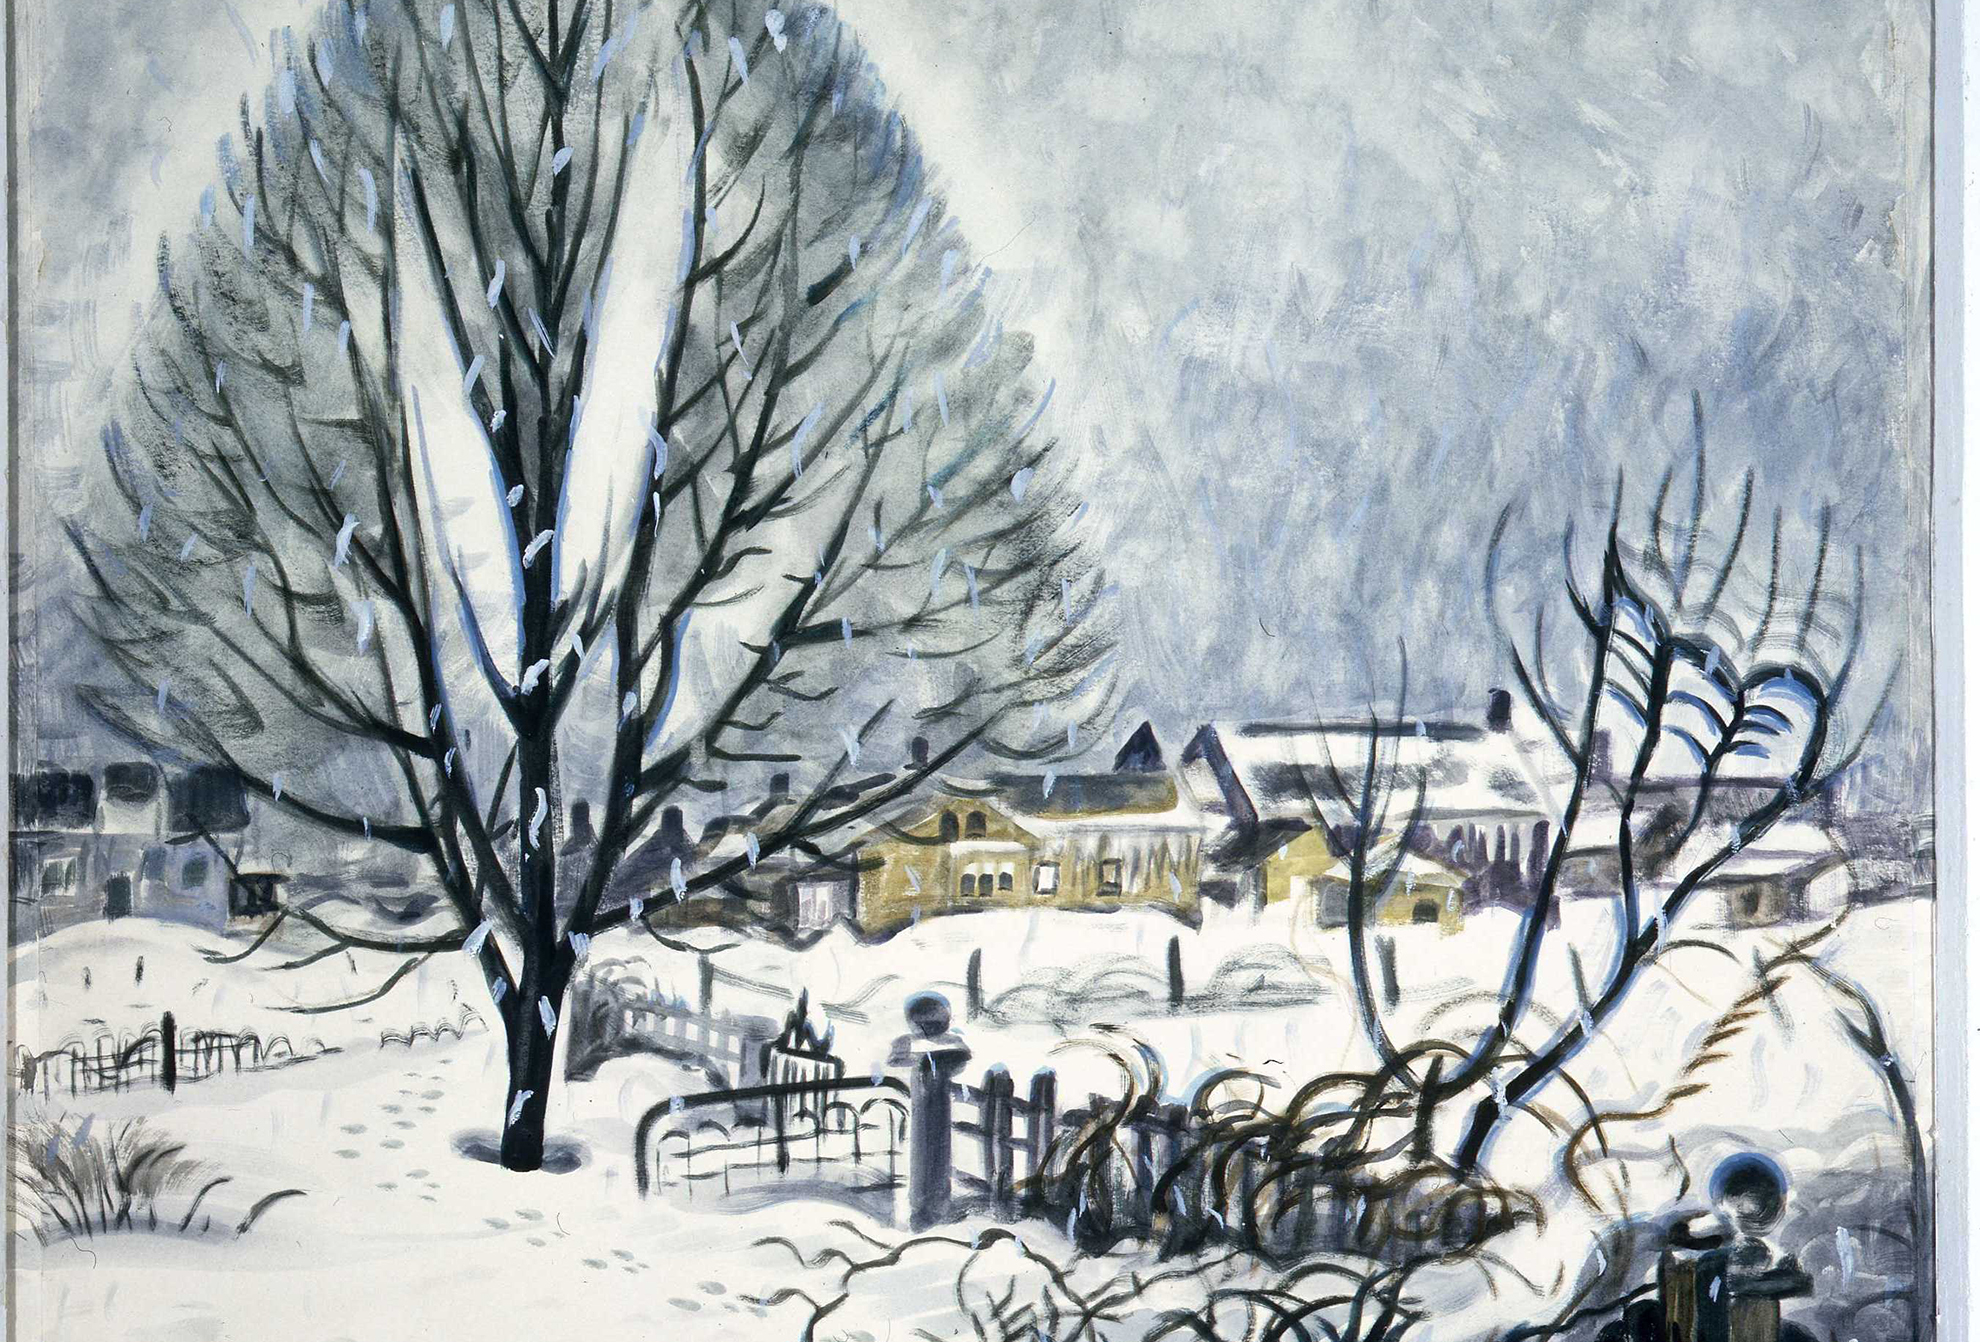 "Day in Midwinter" (1945) by Charles E. Burchfield